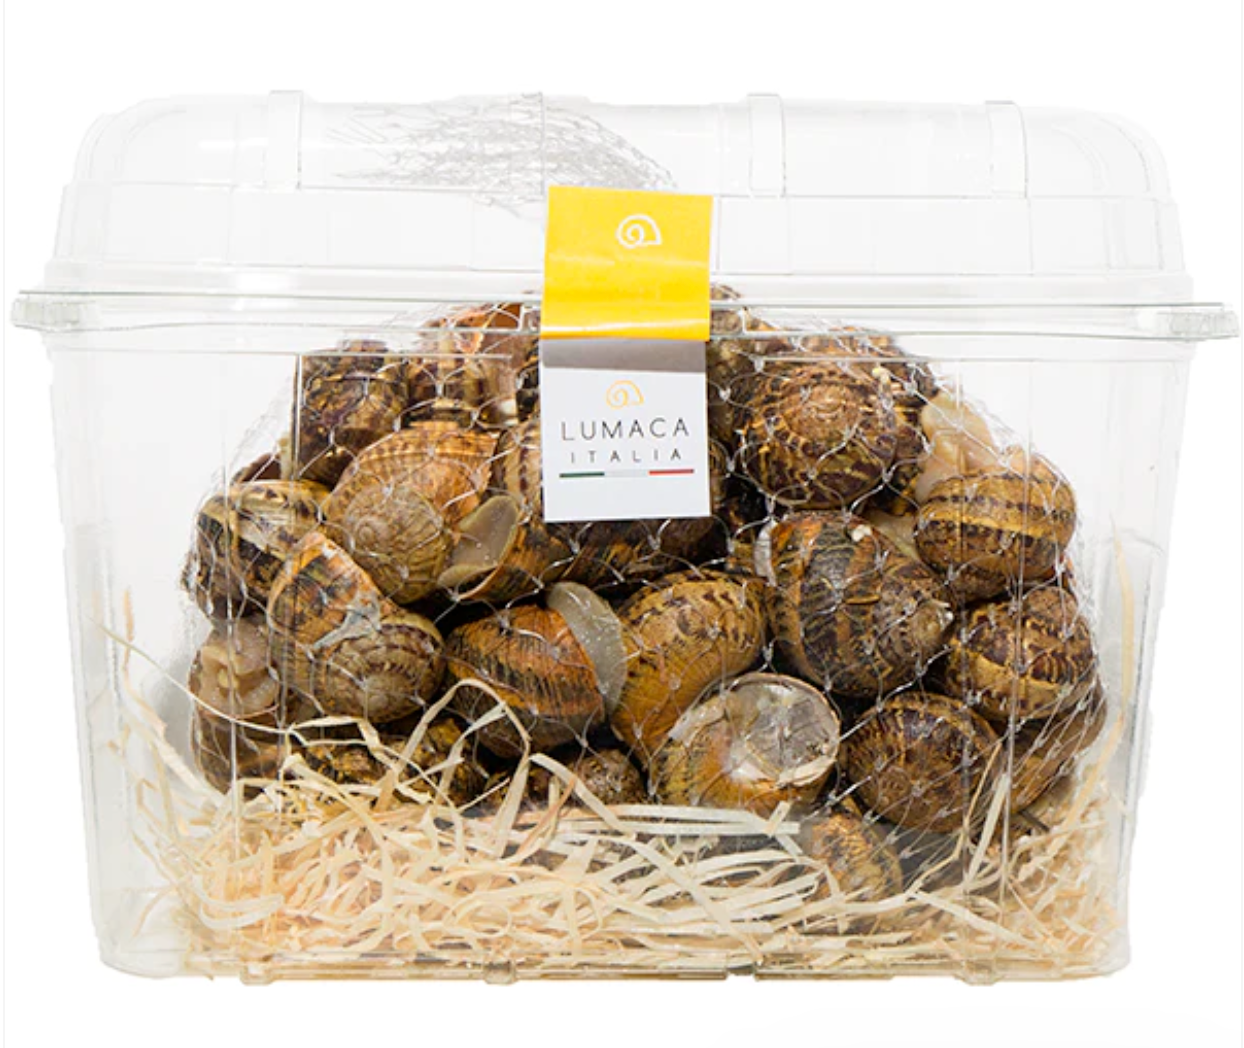 Truffle and snail risotto kit